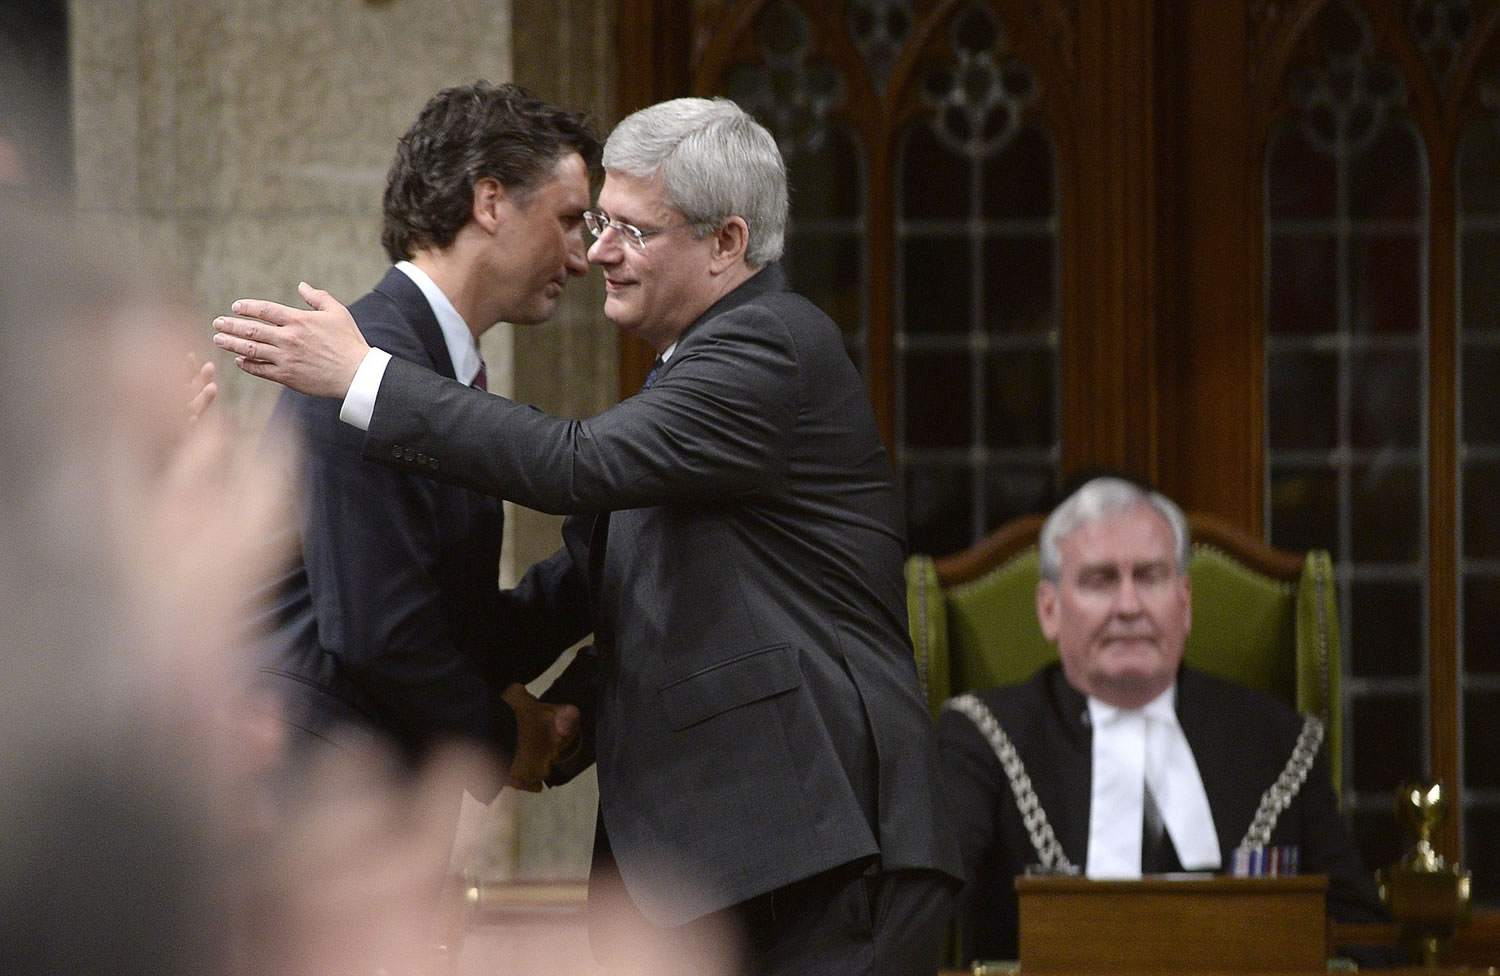 Prime Minister Stephen Harper hugs the leader of the Liberal Party of Canada Justin Trudeau, as Sergeant-at-Arms Kevin Vickers, right, looks on in the House of Commons on Thursday in Ottawa.